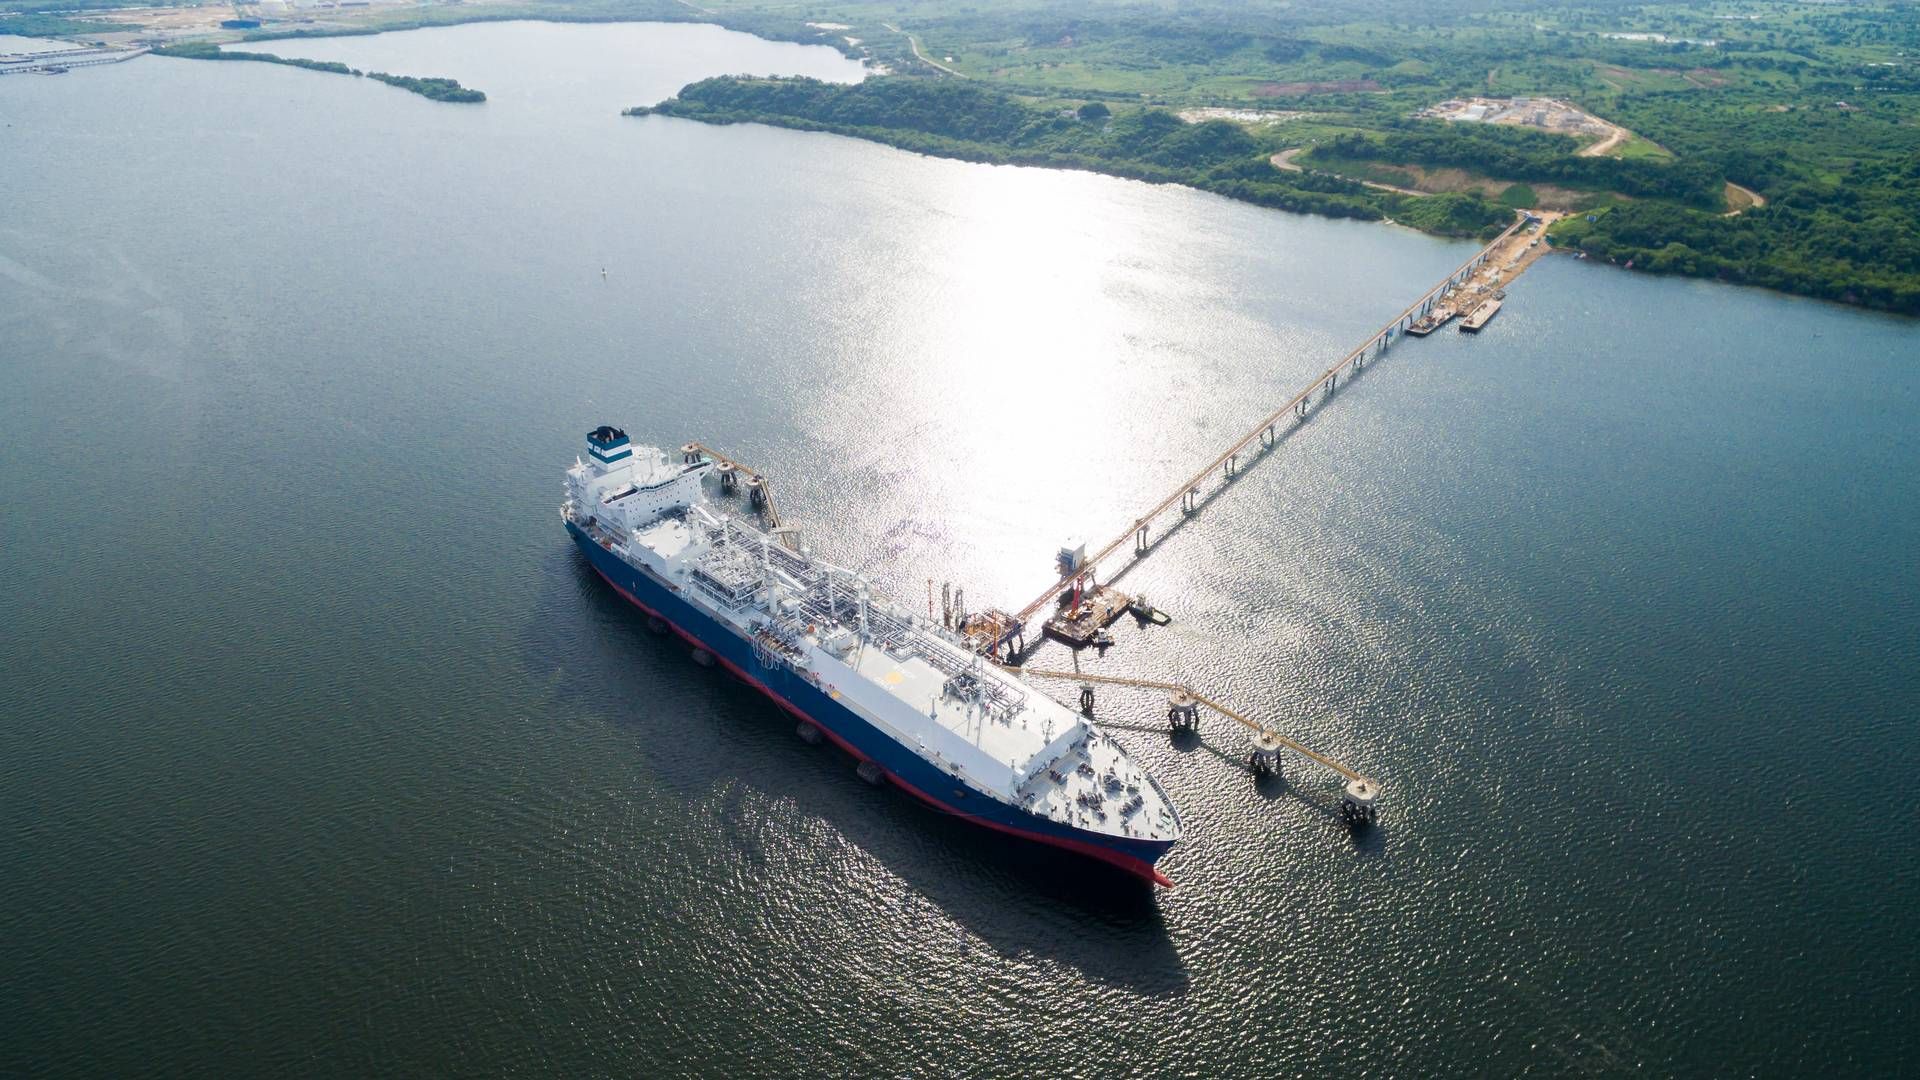 Höegh LNG charters out FSRUs to energy companies, and demand for the floating terminals has been increasing in recent years. | Photo: Höegh LNG